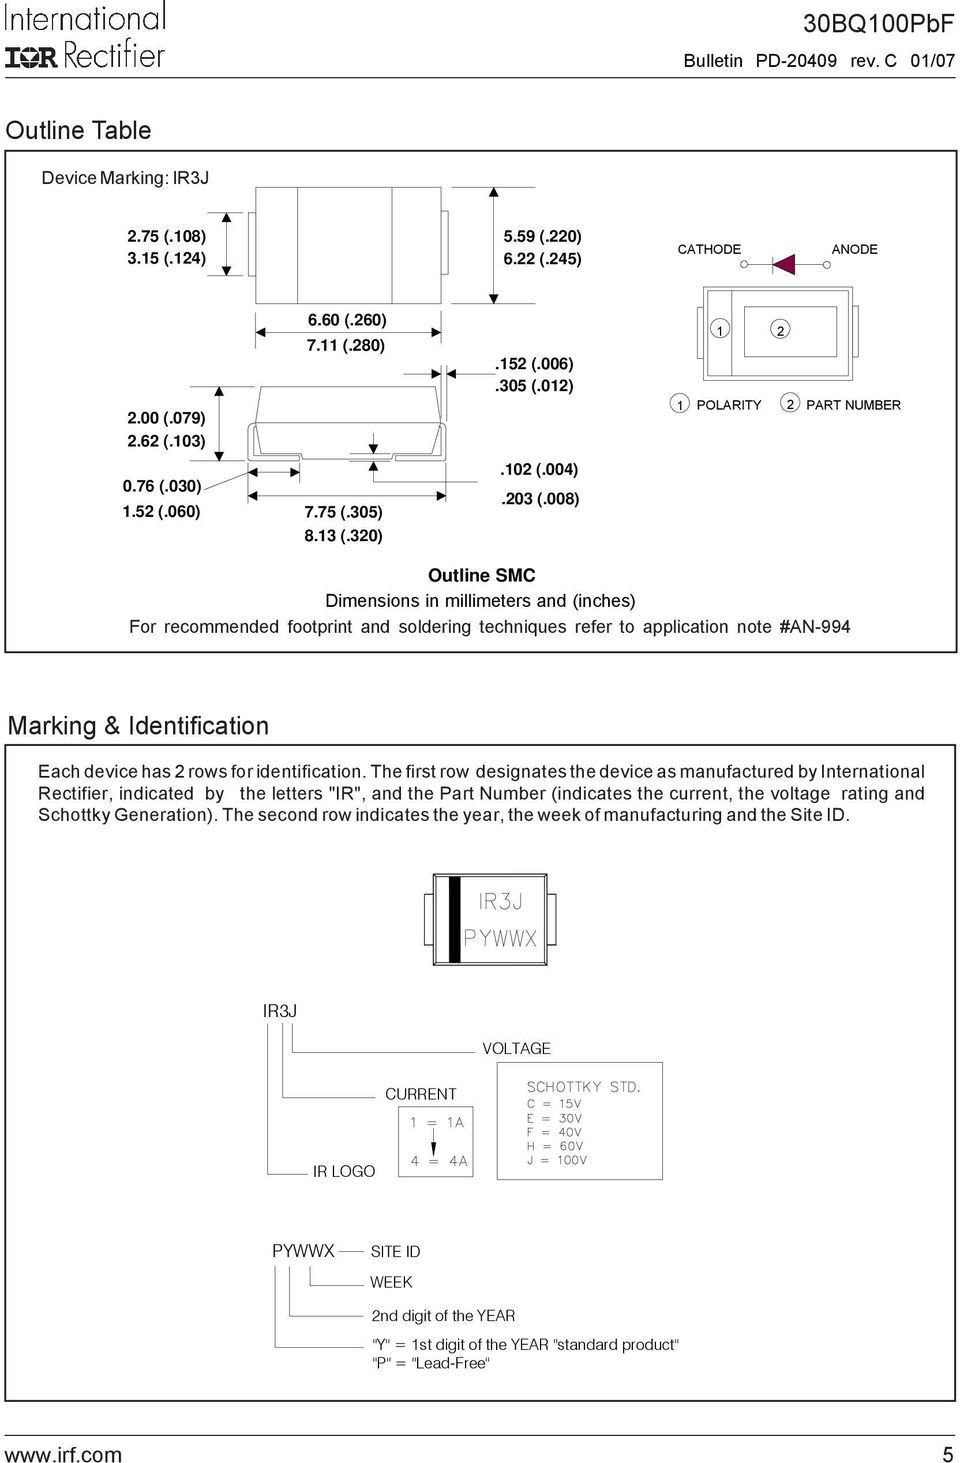 008) Outline SMC Dimensions in millimeters and (inches) For recommended footprint and soldering techniques refer to application note #AN-994 Marking & Identification Each device has 2 rows for